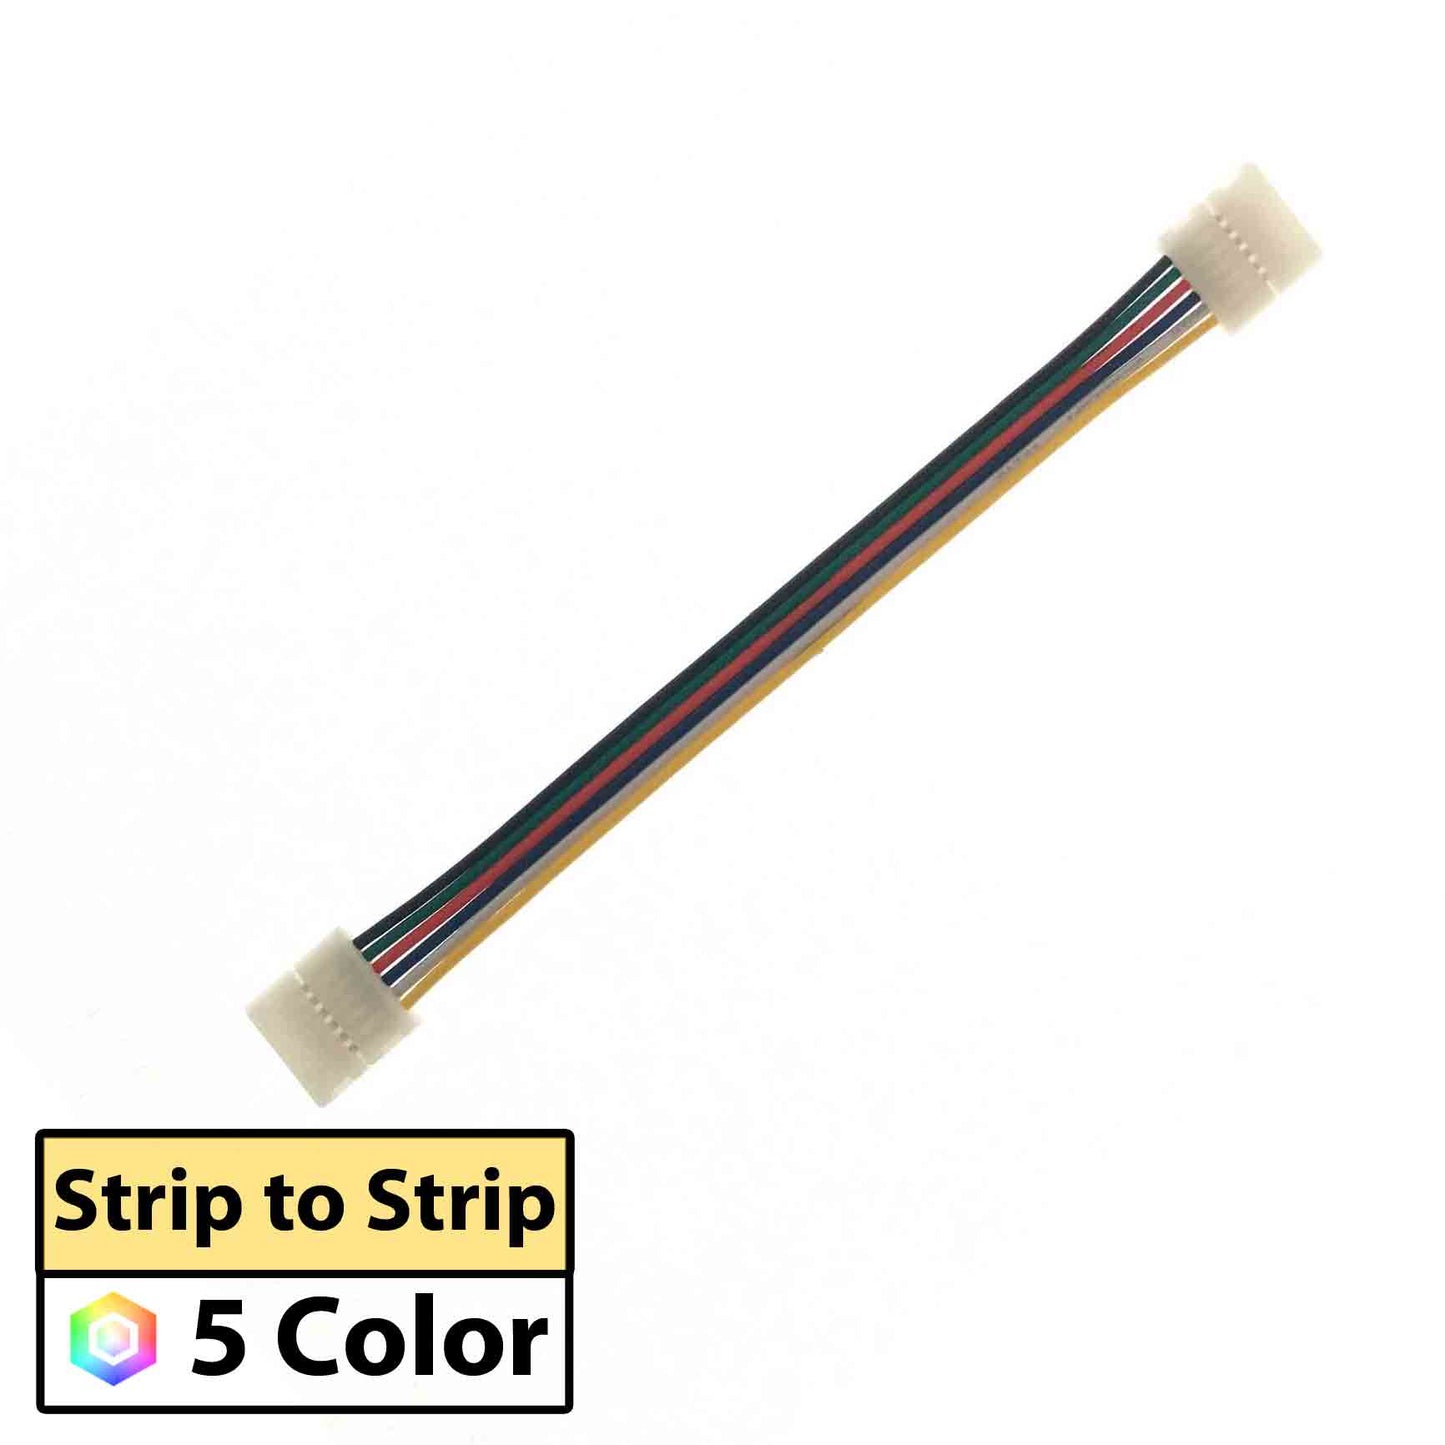 PN 3076 | LED Strip to Strip | Solderless Connector Cable for 5-in-1 LED Strip - 10 PACK